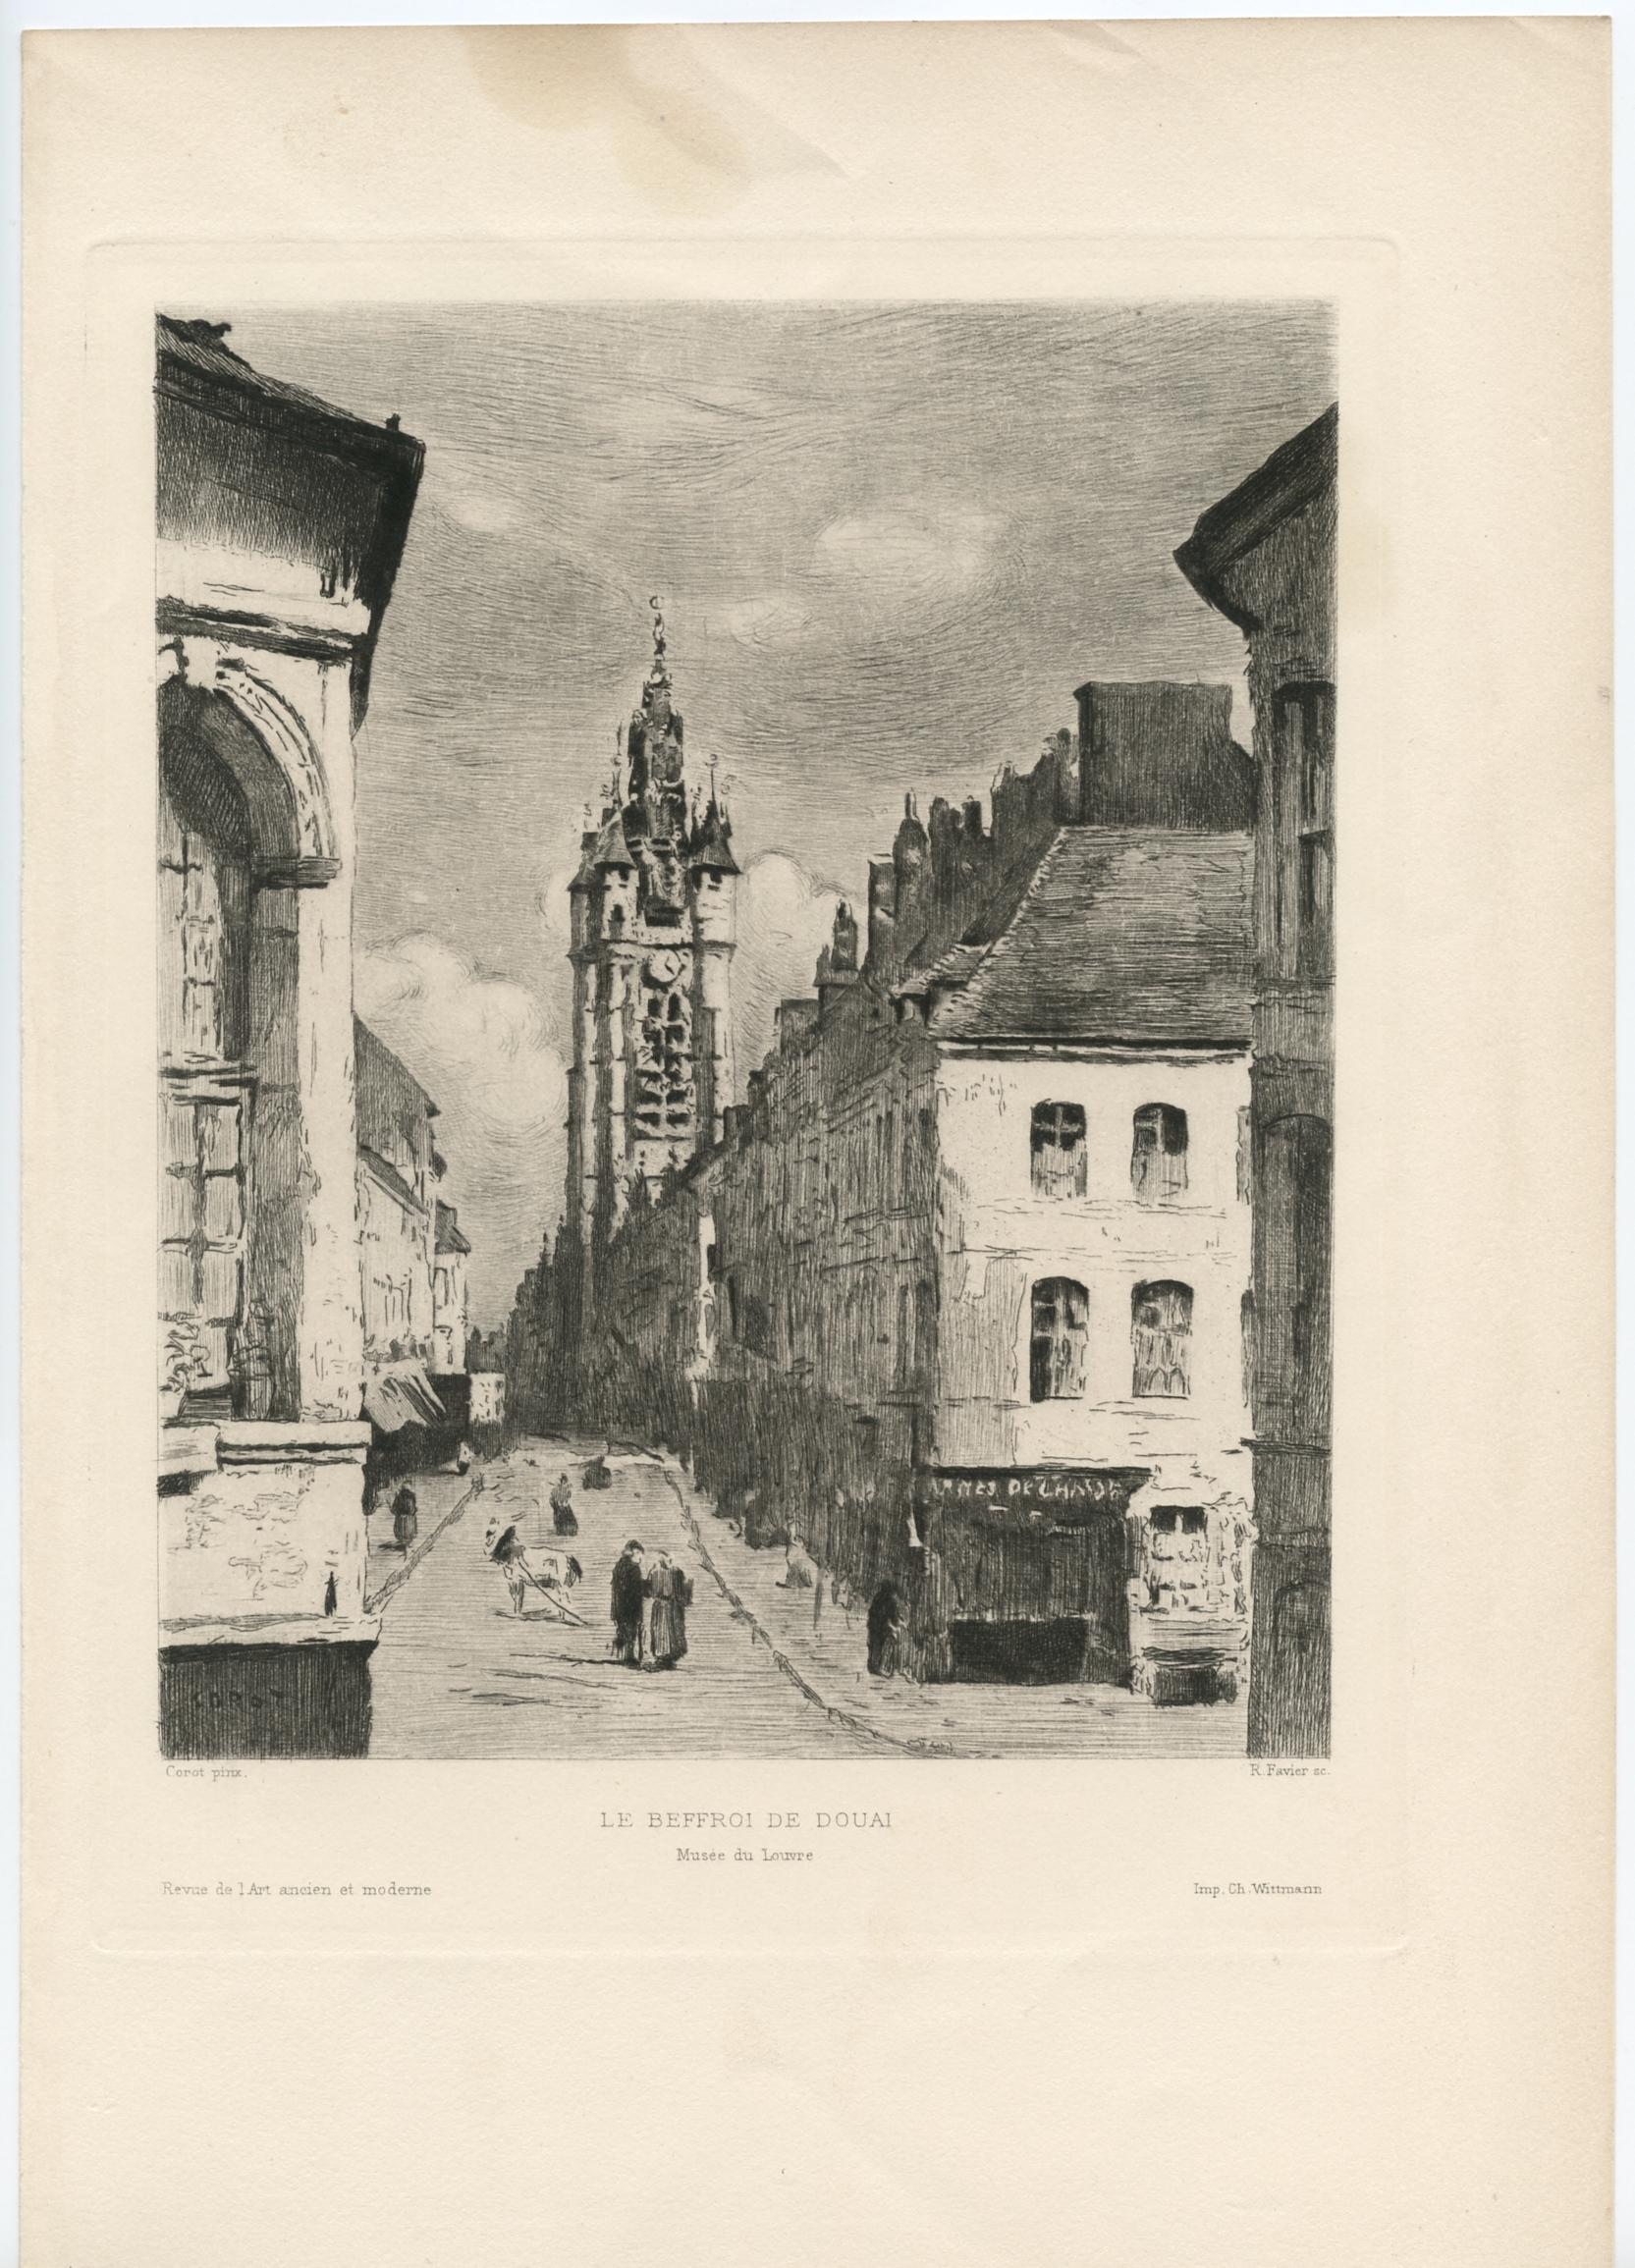 Medium: etching. Etched by Favier after Corot. Printed in Paris by Chardon Wittmann on cream wove paper and published in 1911 by the Revue de l'art ancien et moderne. Plate size: 8 3/4 x 6 3/4 inches (225 x 170 mm). Signed in the plate (not by